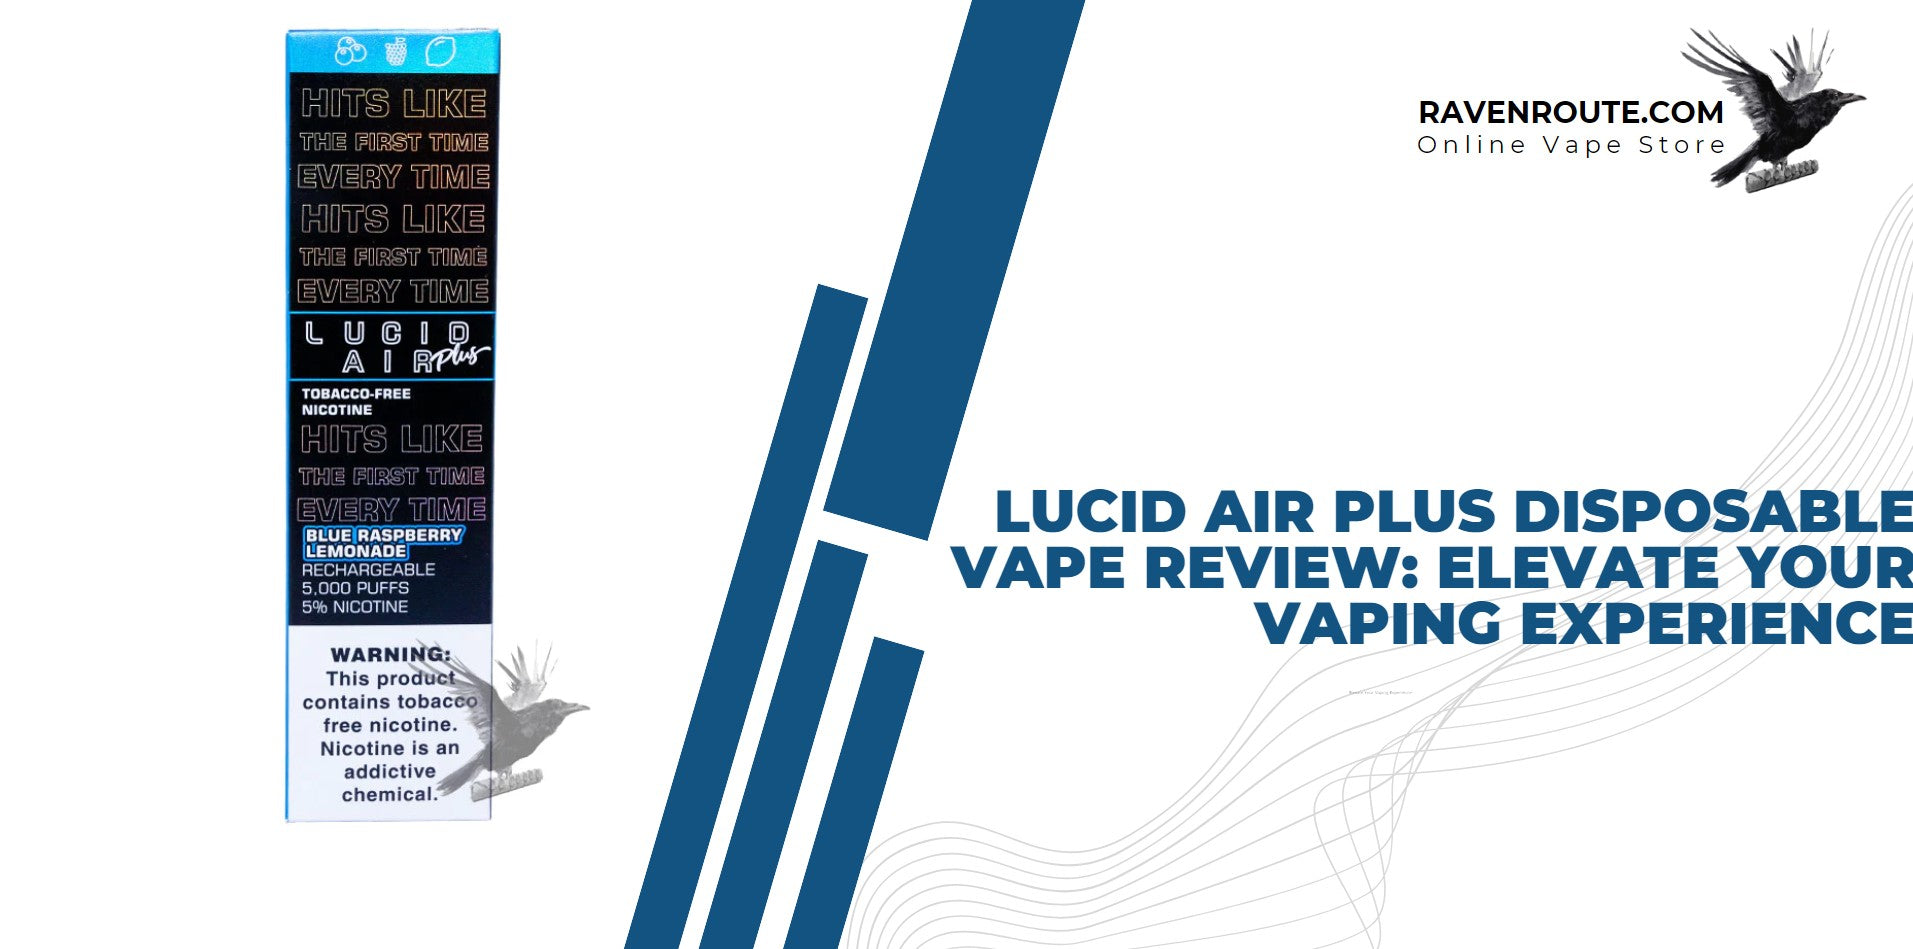 Lucid Air Plus Disposable Vape Reviews : Elevate Your Vaping Experience